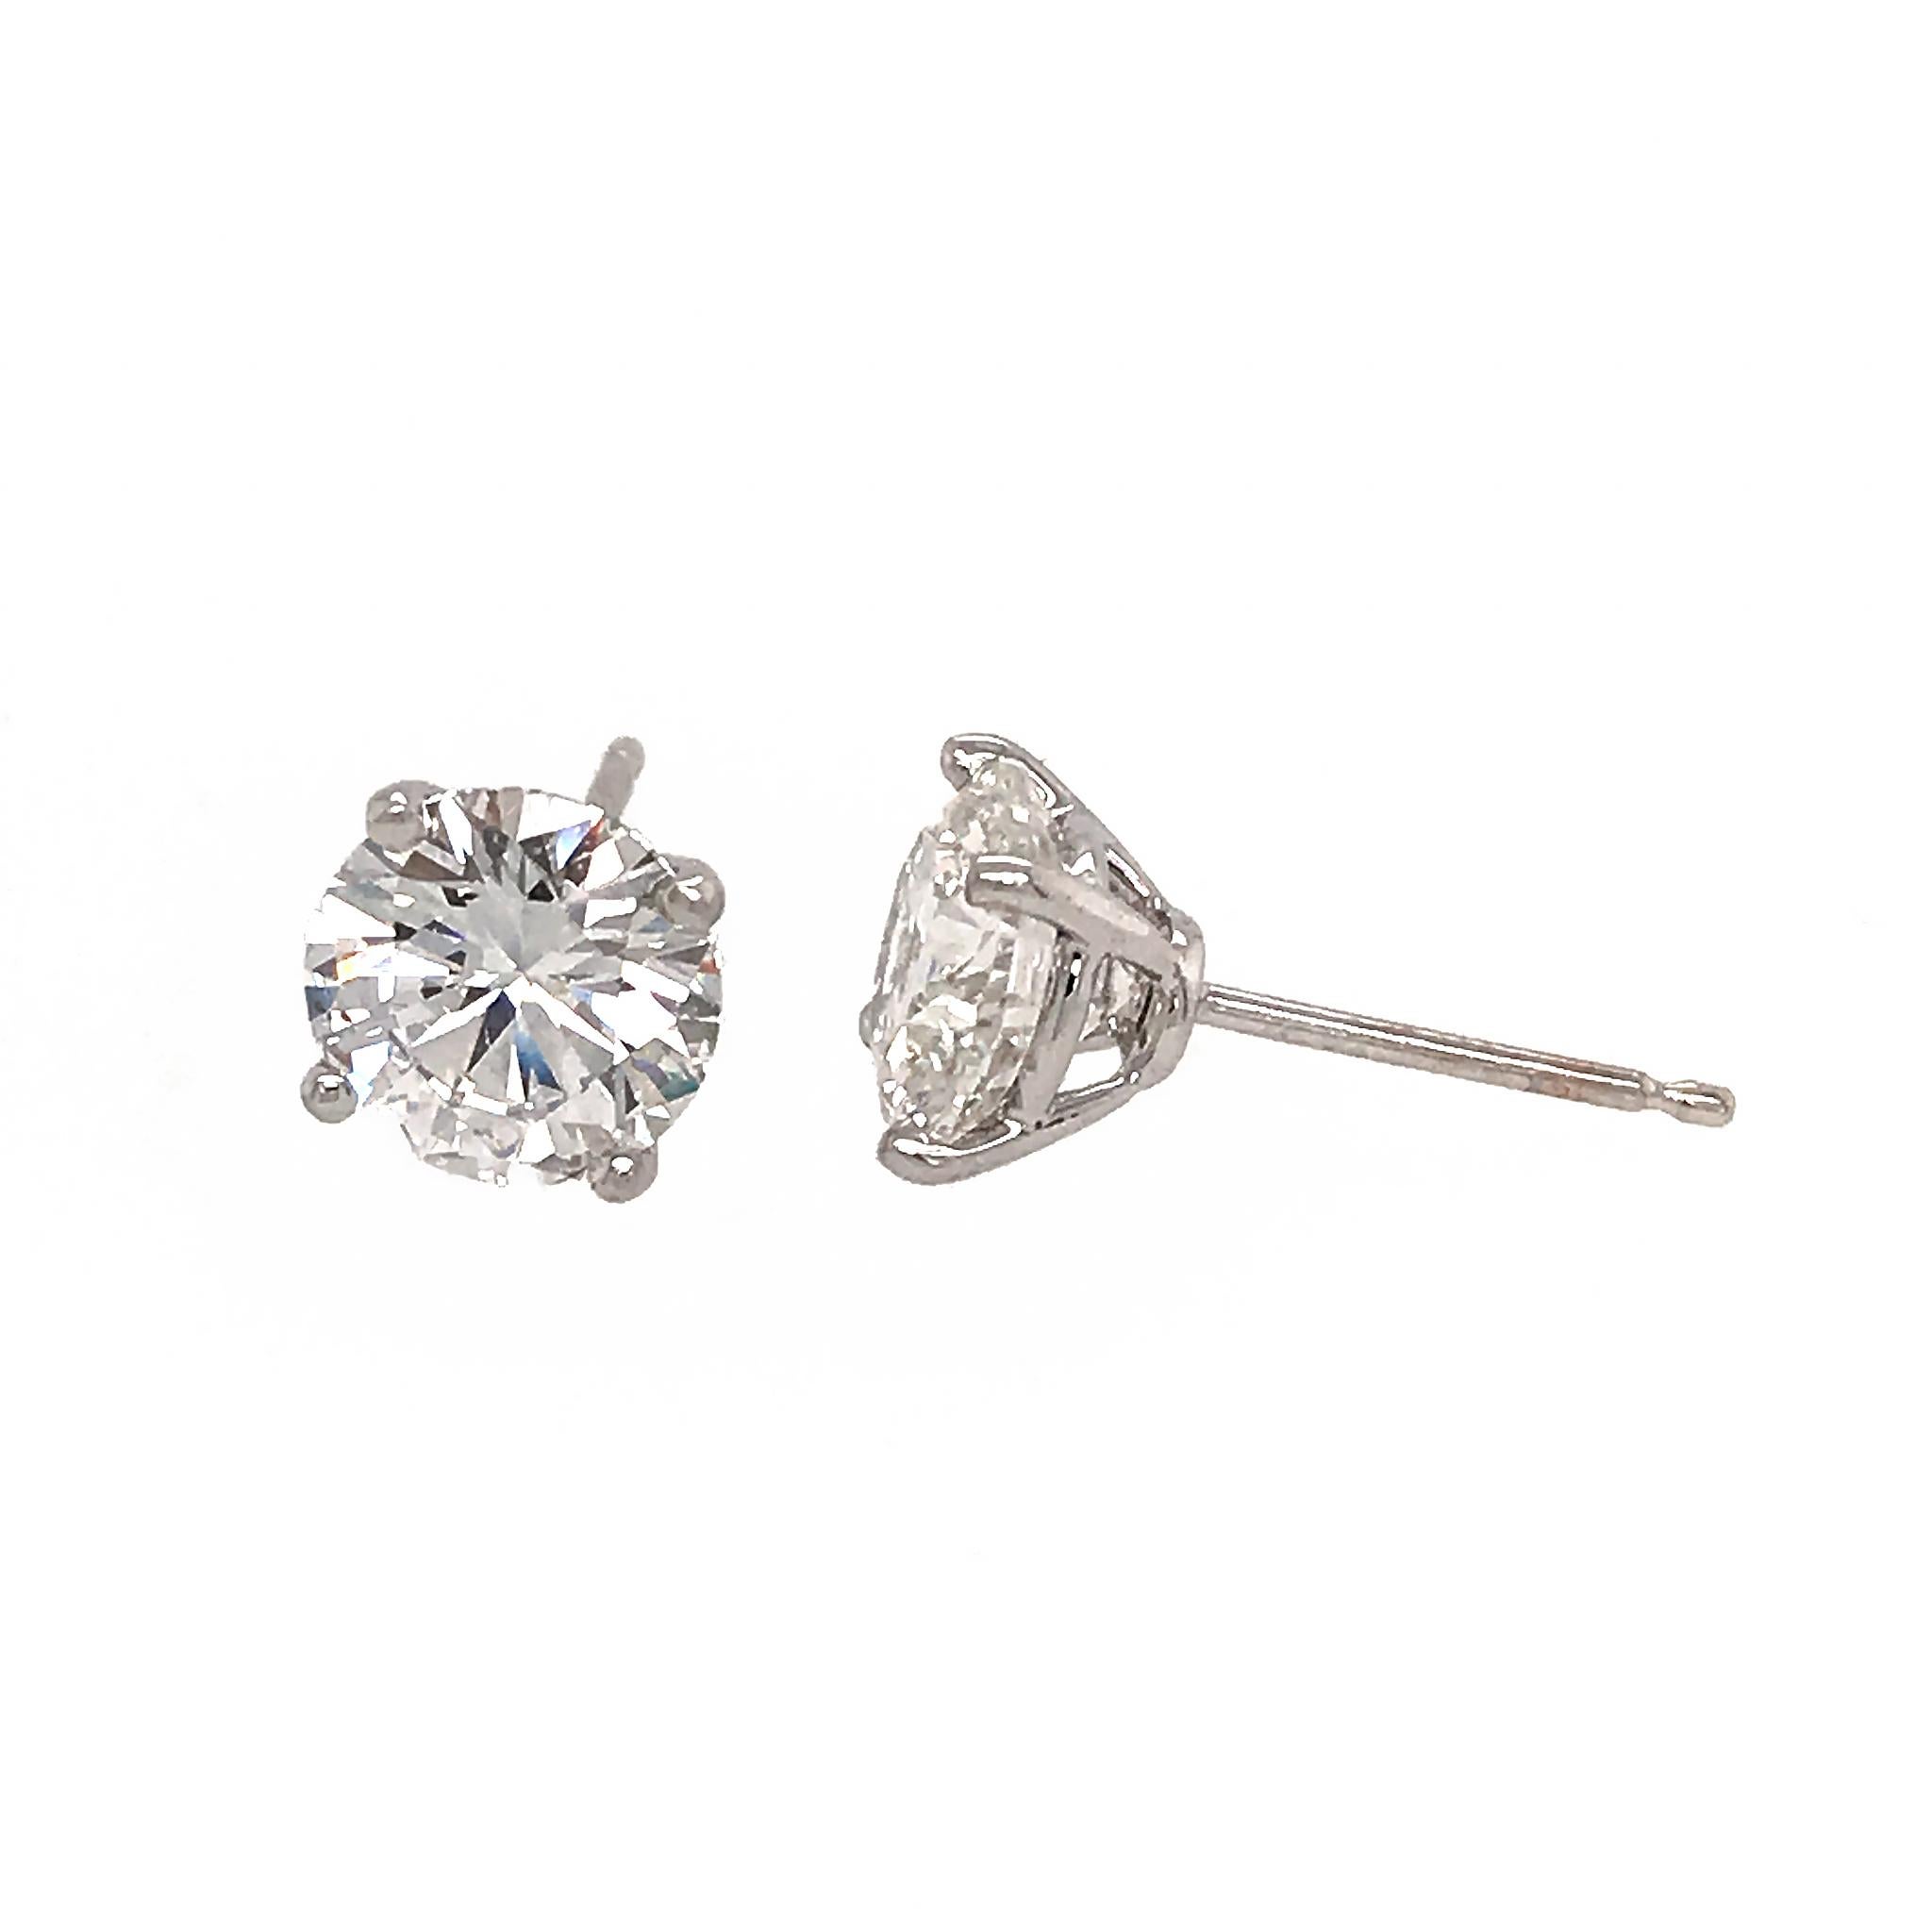 Classic GIA Certified Round Brilliant Diamond Studs Earrings 1